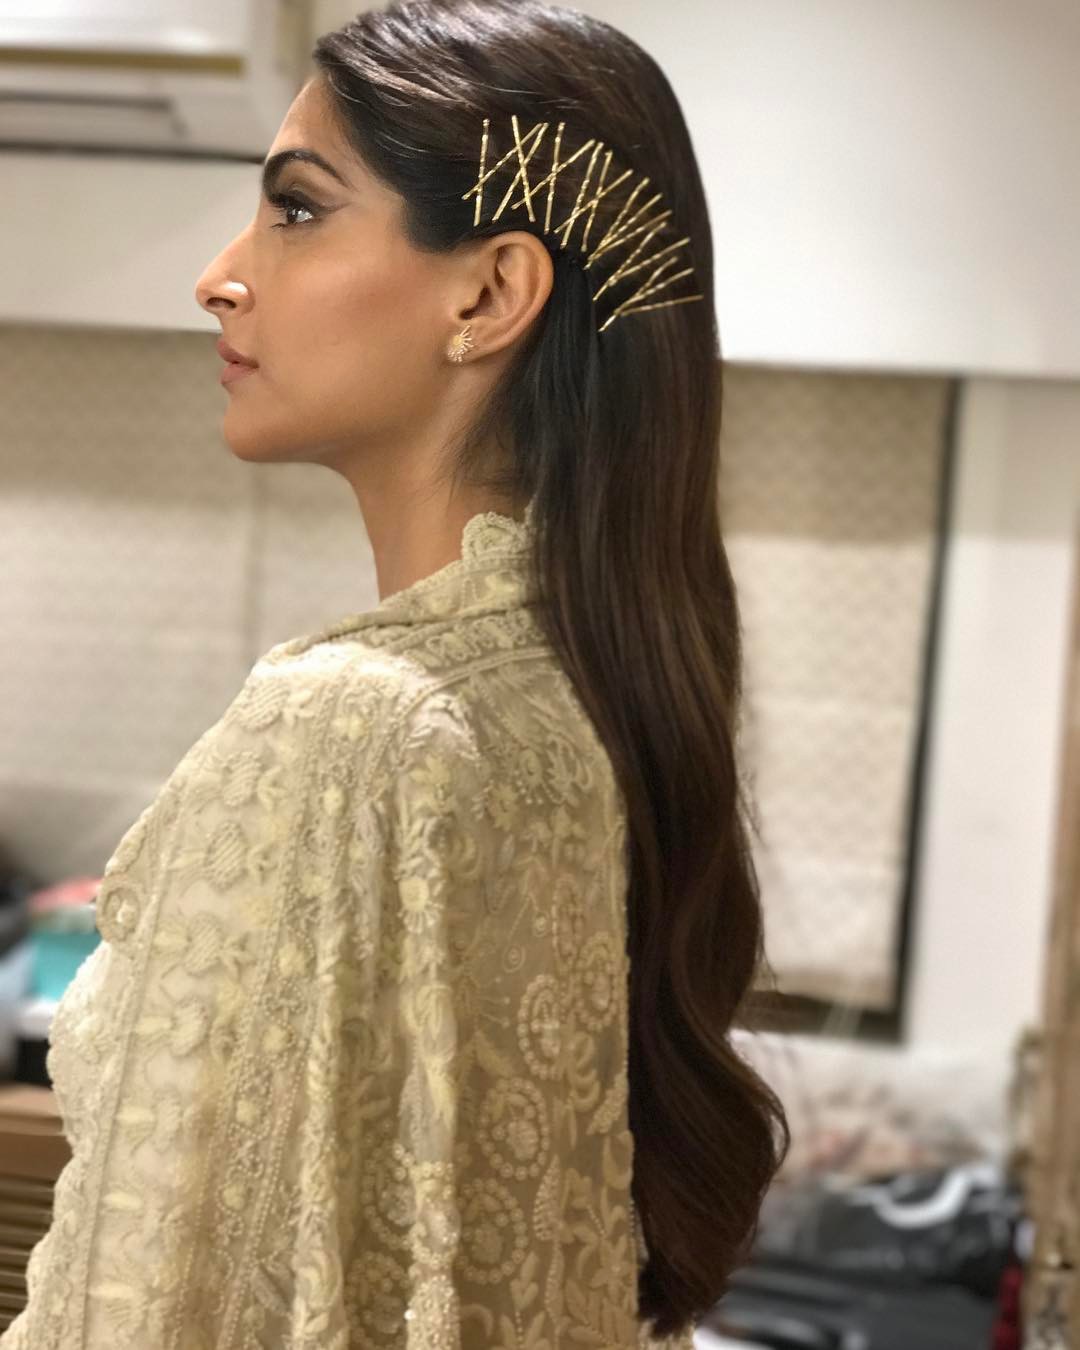 Sonam Kapoor Hair Accessories are the new Party Hairstyles – Stylingstars